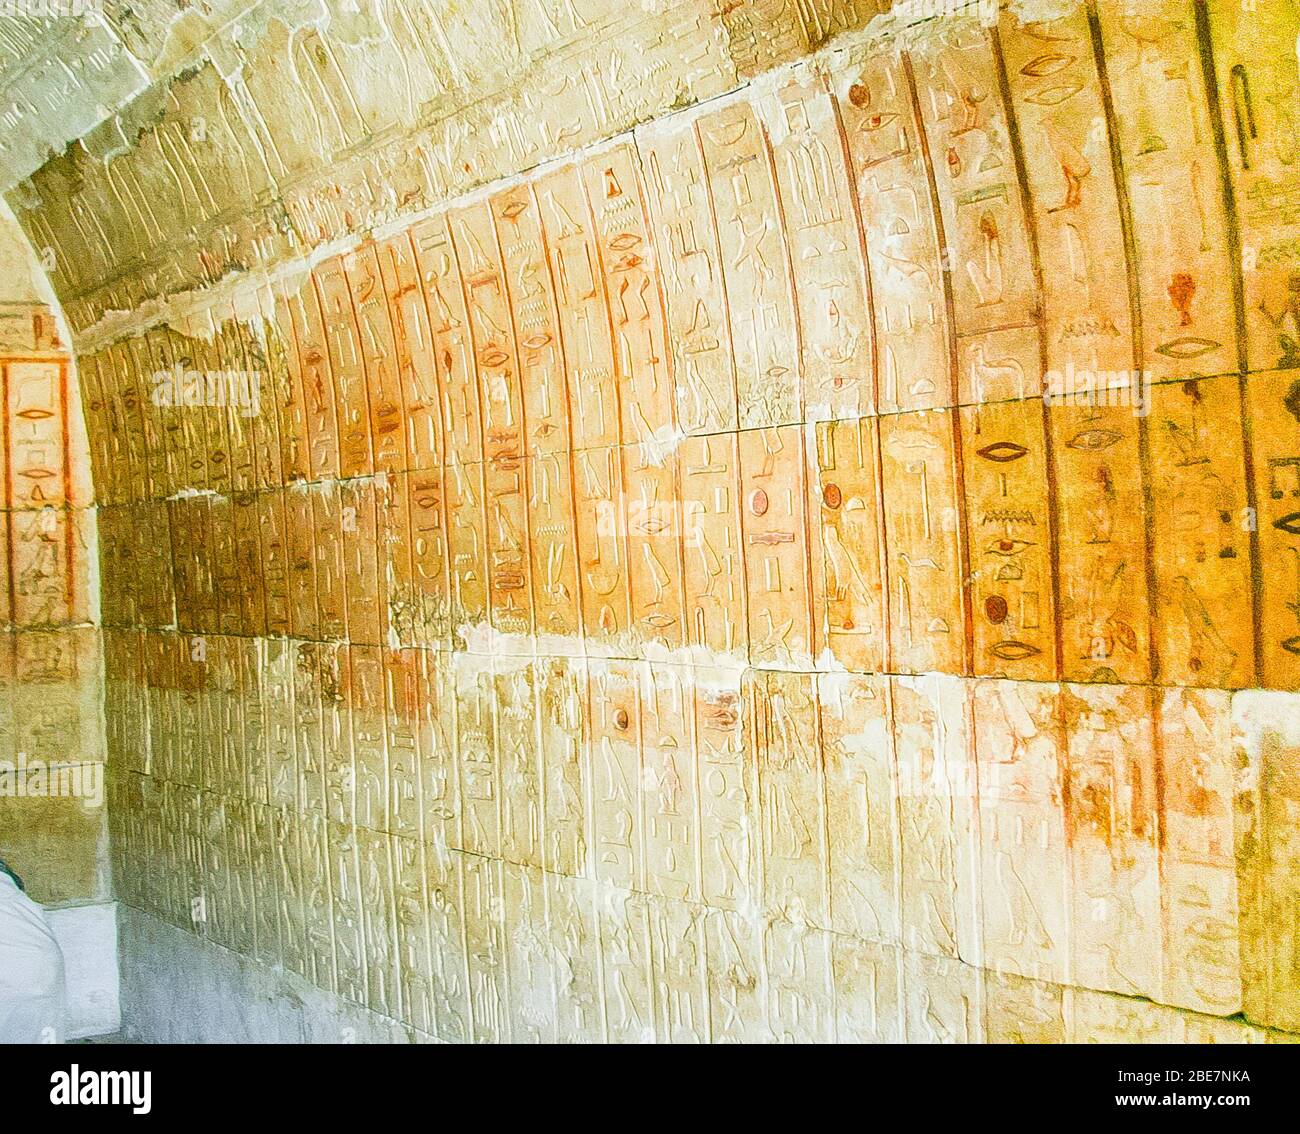 Egypt, Cairo, Heliopolis, a zone prepared to be an open air museum in the future. Tomb of Panehesy, 26th dynasty (saite). Texts on side walls. Stock Photo